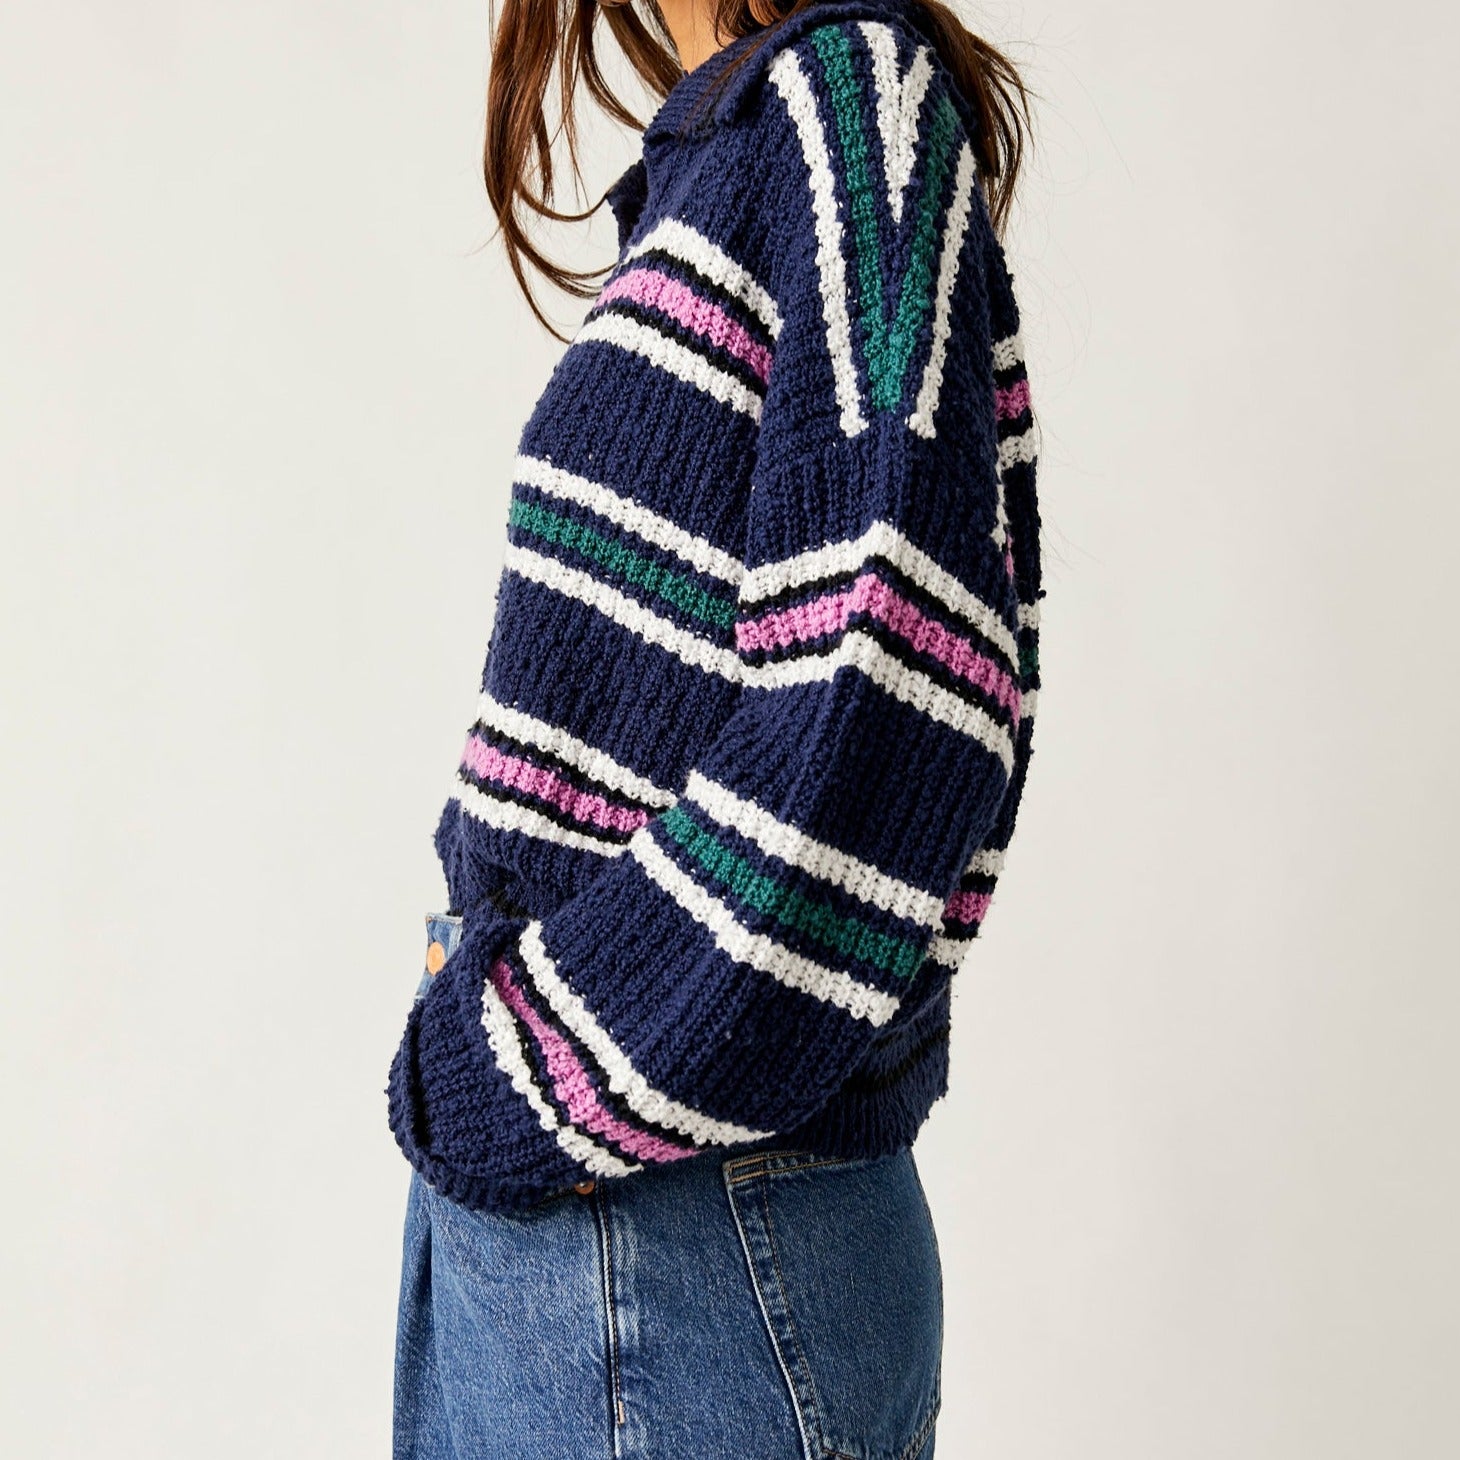 Free People Kennedy Pullover